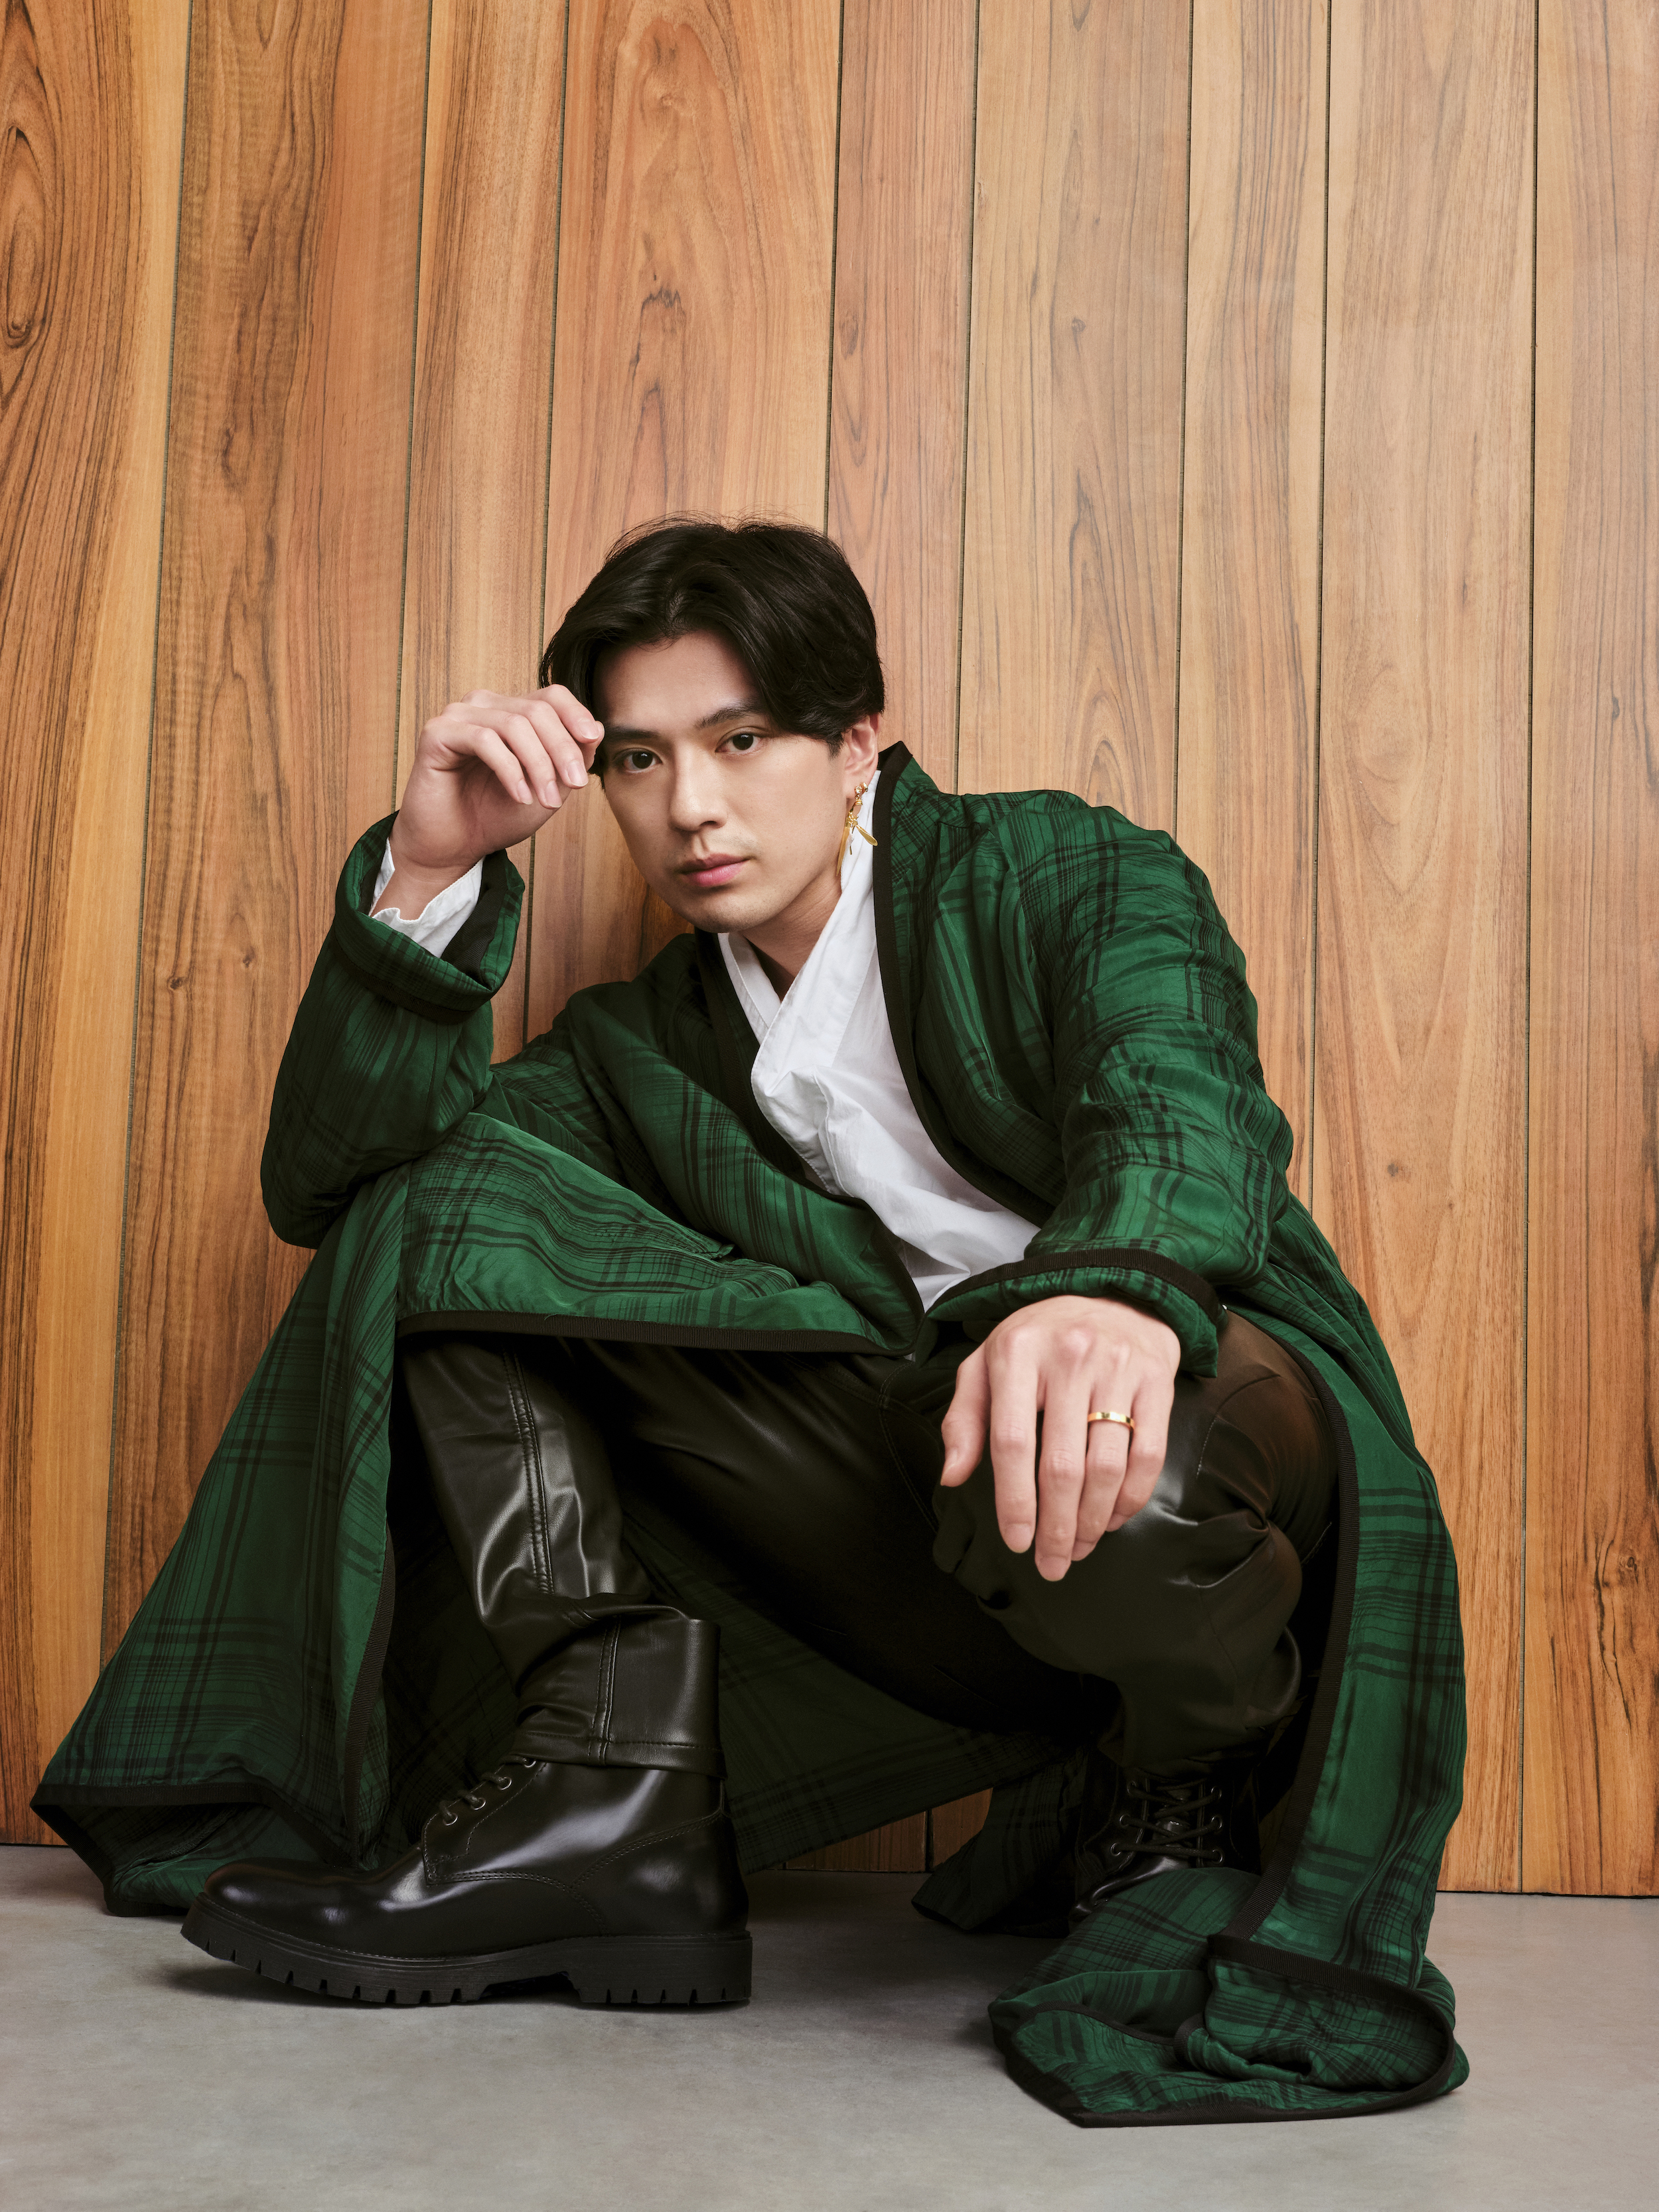 Mackenyu in a green coat giving a fashion cover pose while leaning against a wood wall in a One Piece photo shoot